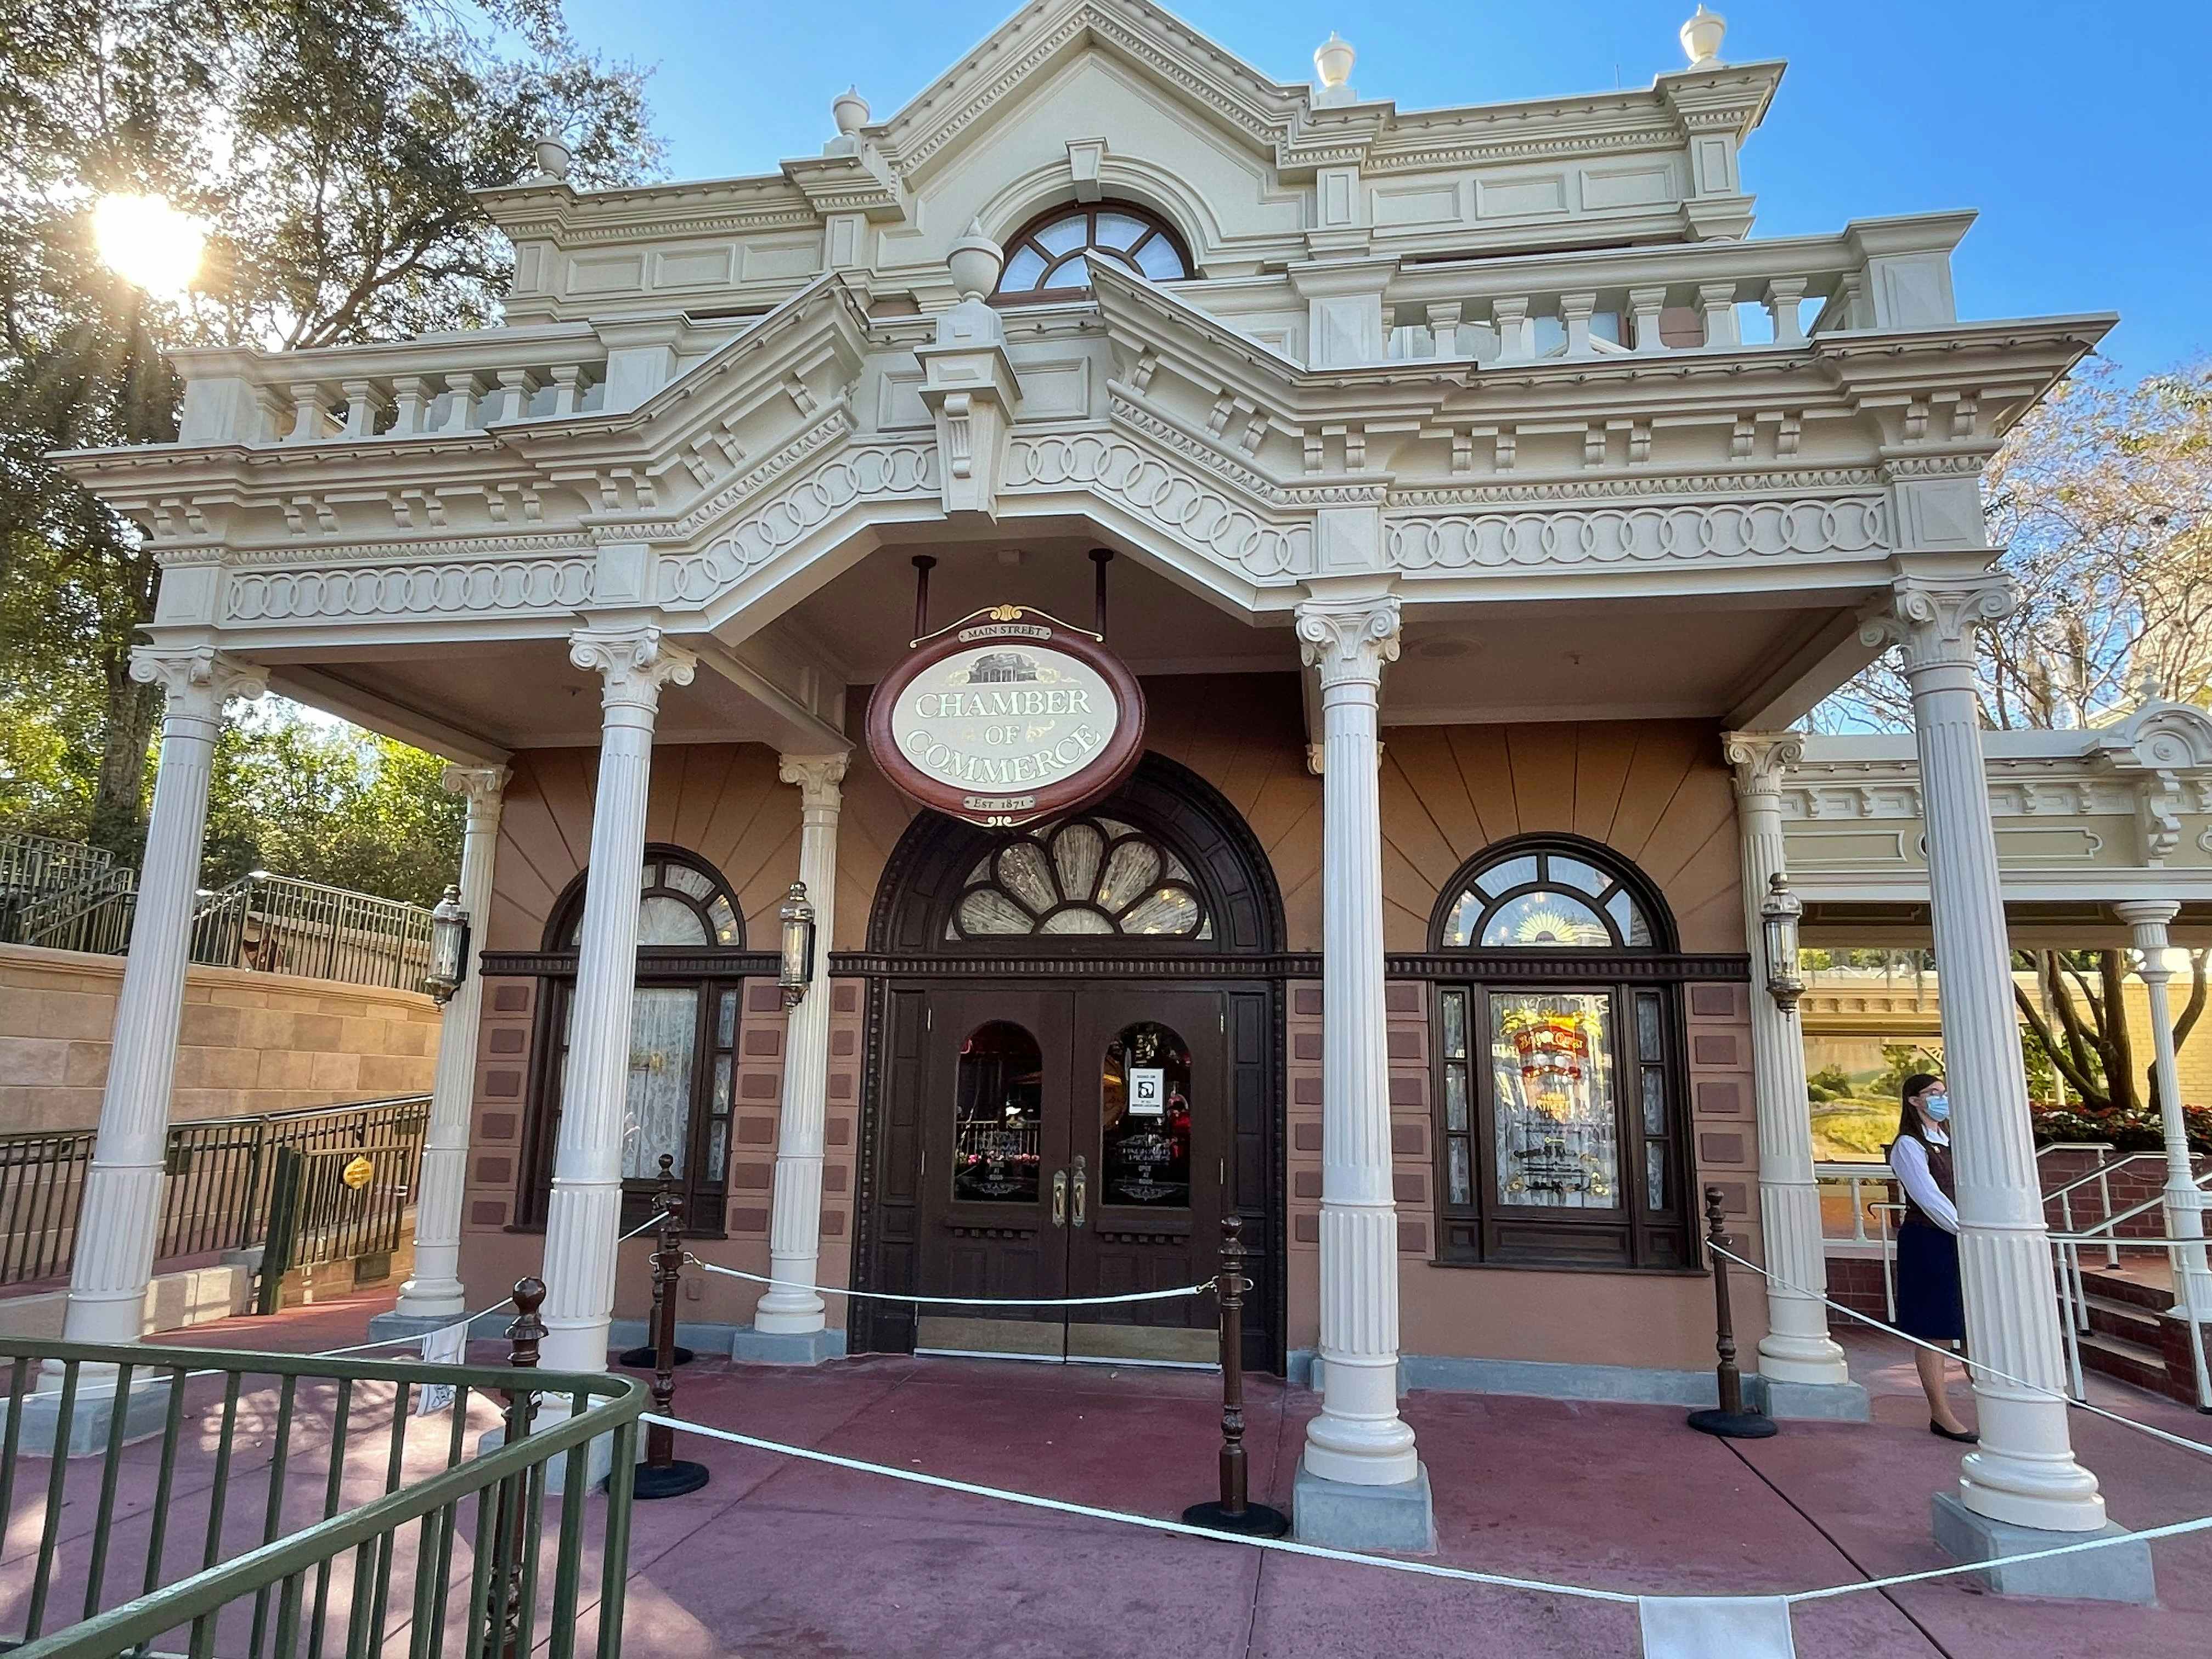 Entrance to the Walt Disney World Chamber of Commerce, which is also the lost and found.